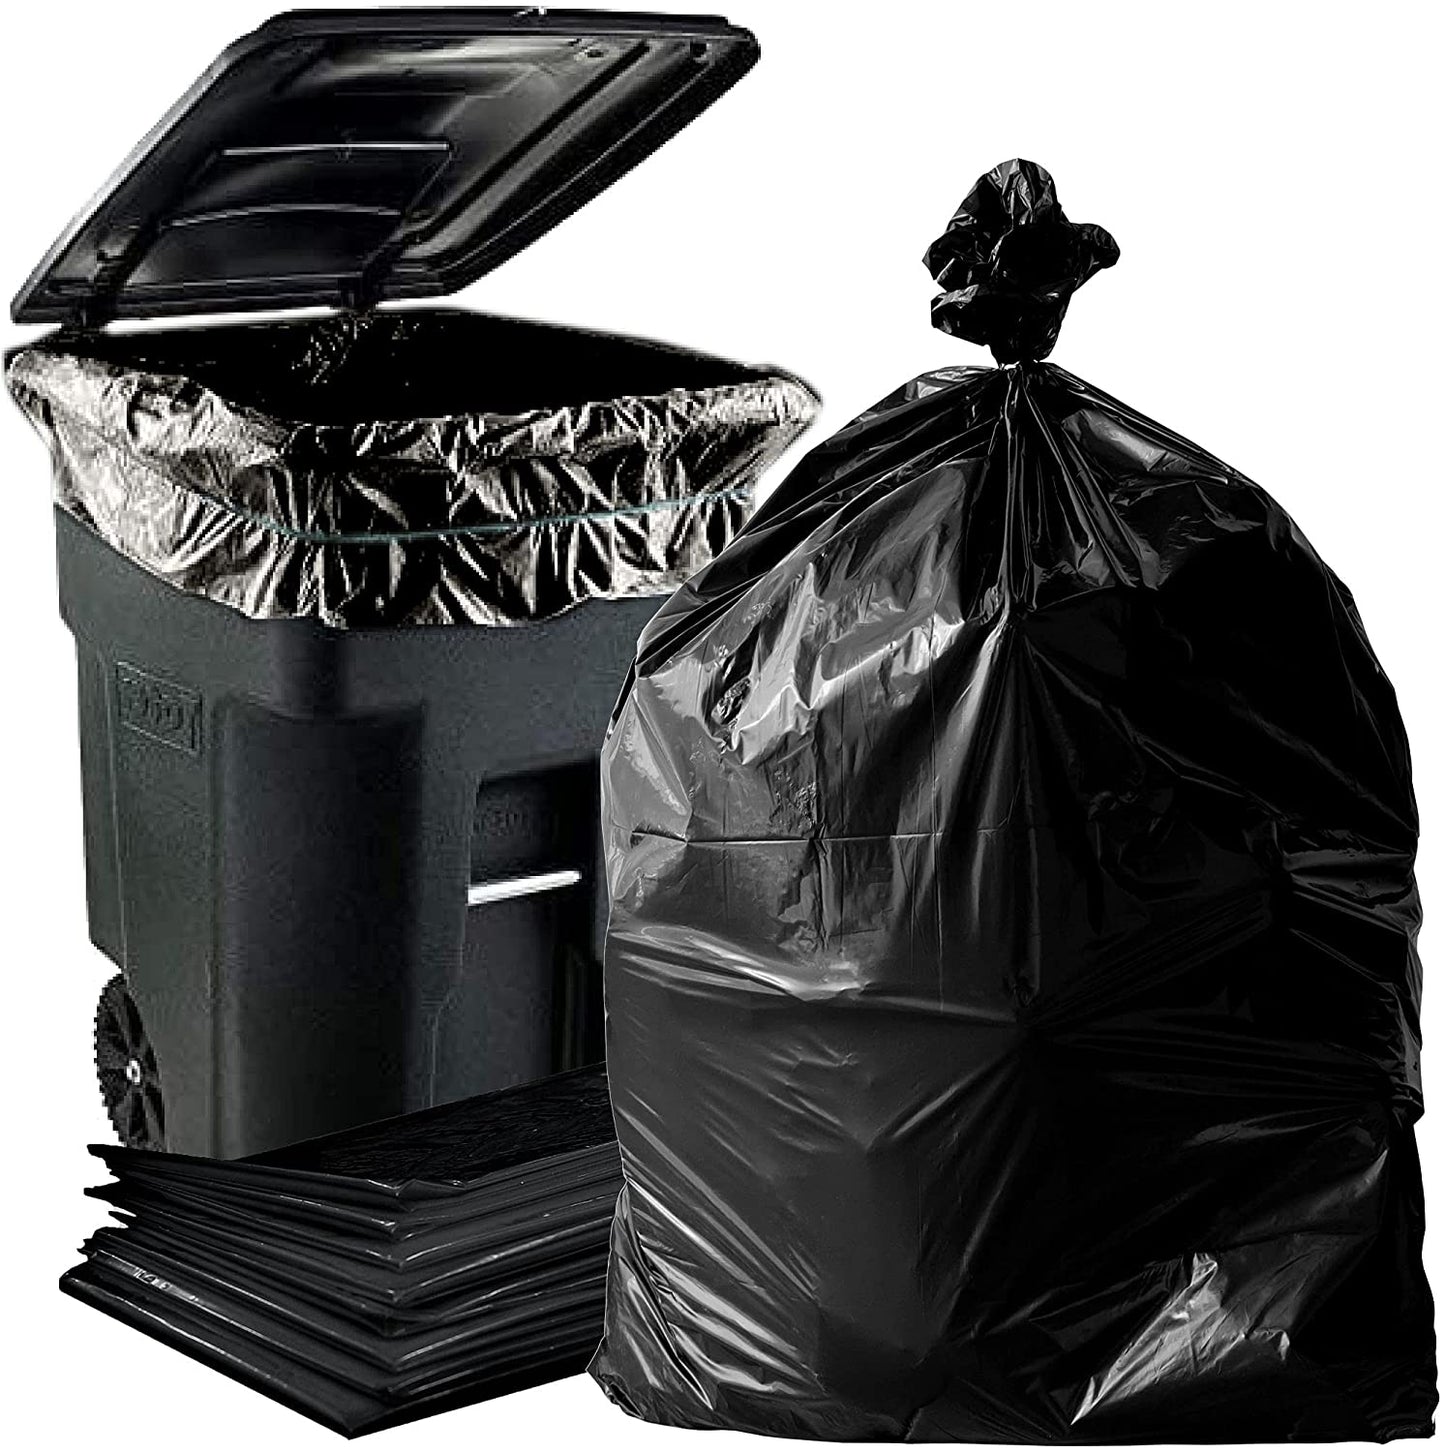 Dyno Products Online 95-Gallon, 2 Mil Thick Heavy-Duty Black Trash Bags -  25 Count Extra Large Plastic Garbage Liners Fit Huge Cans for Home Garden